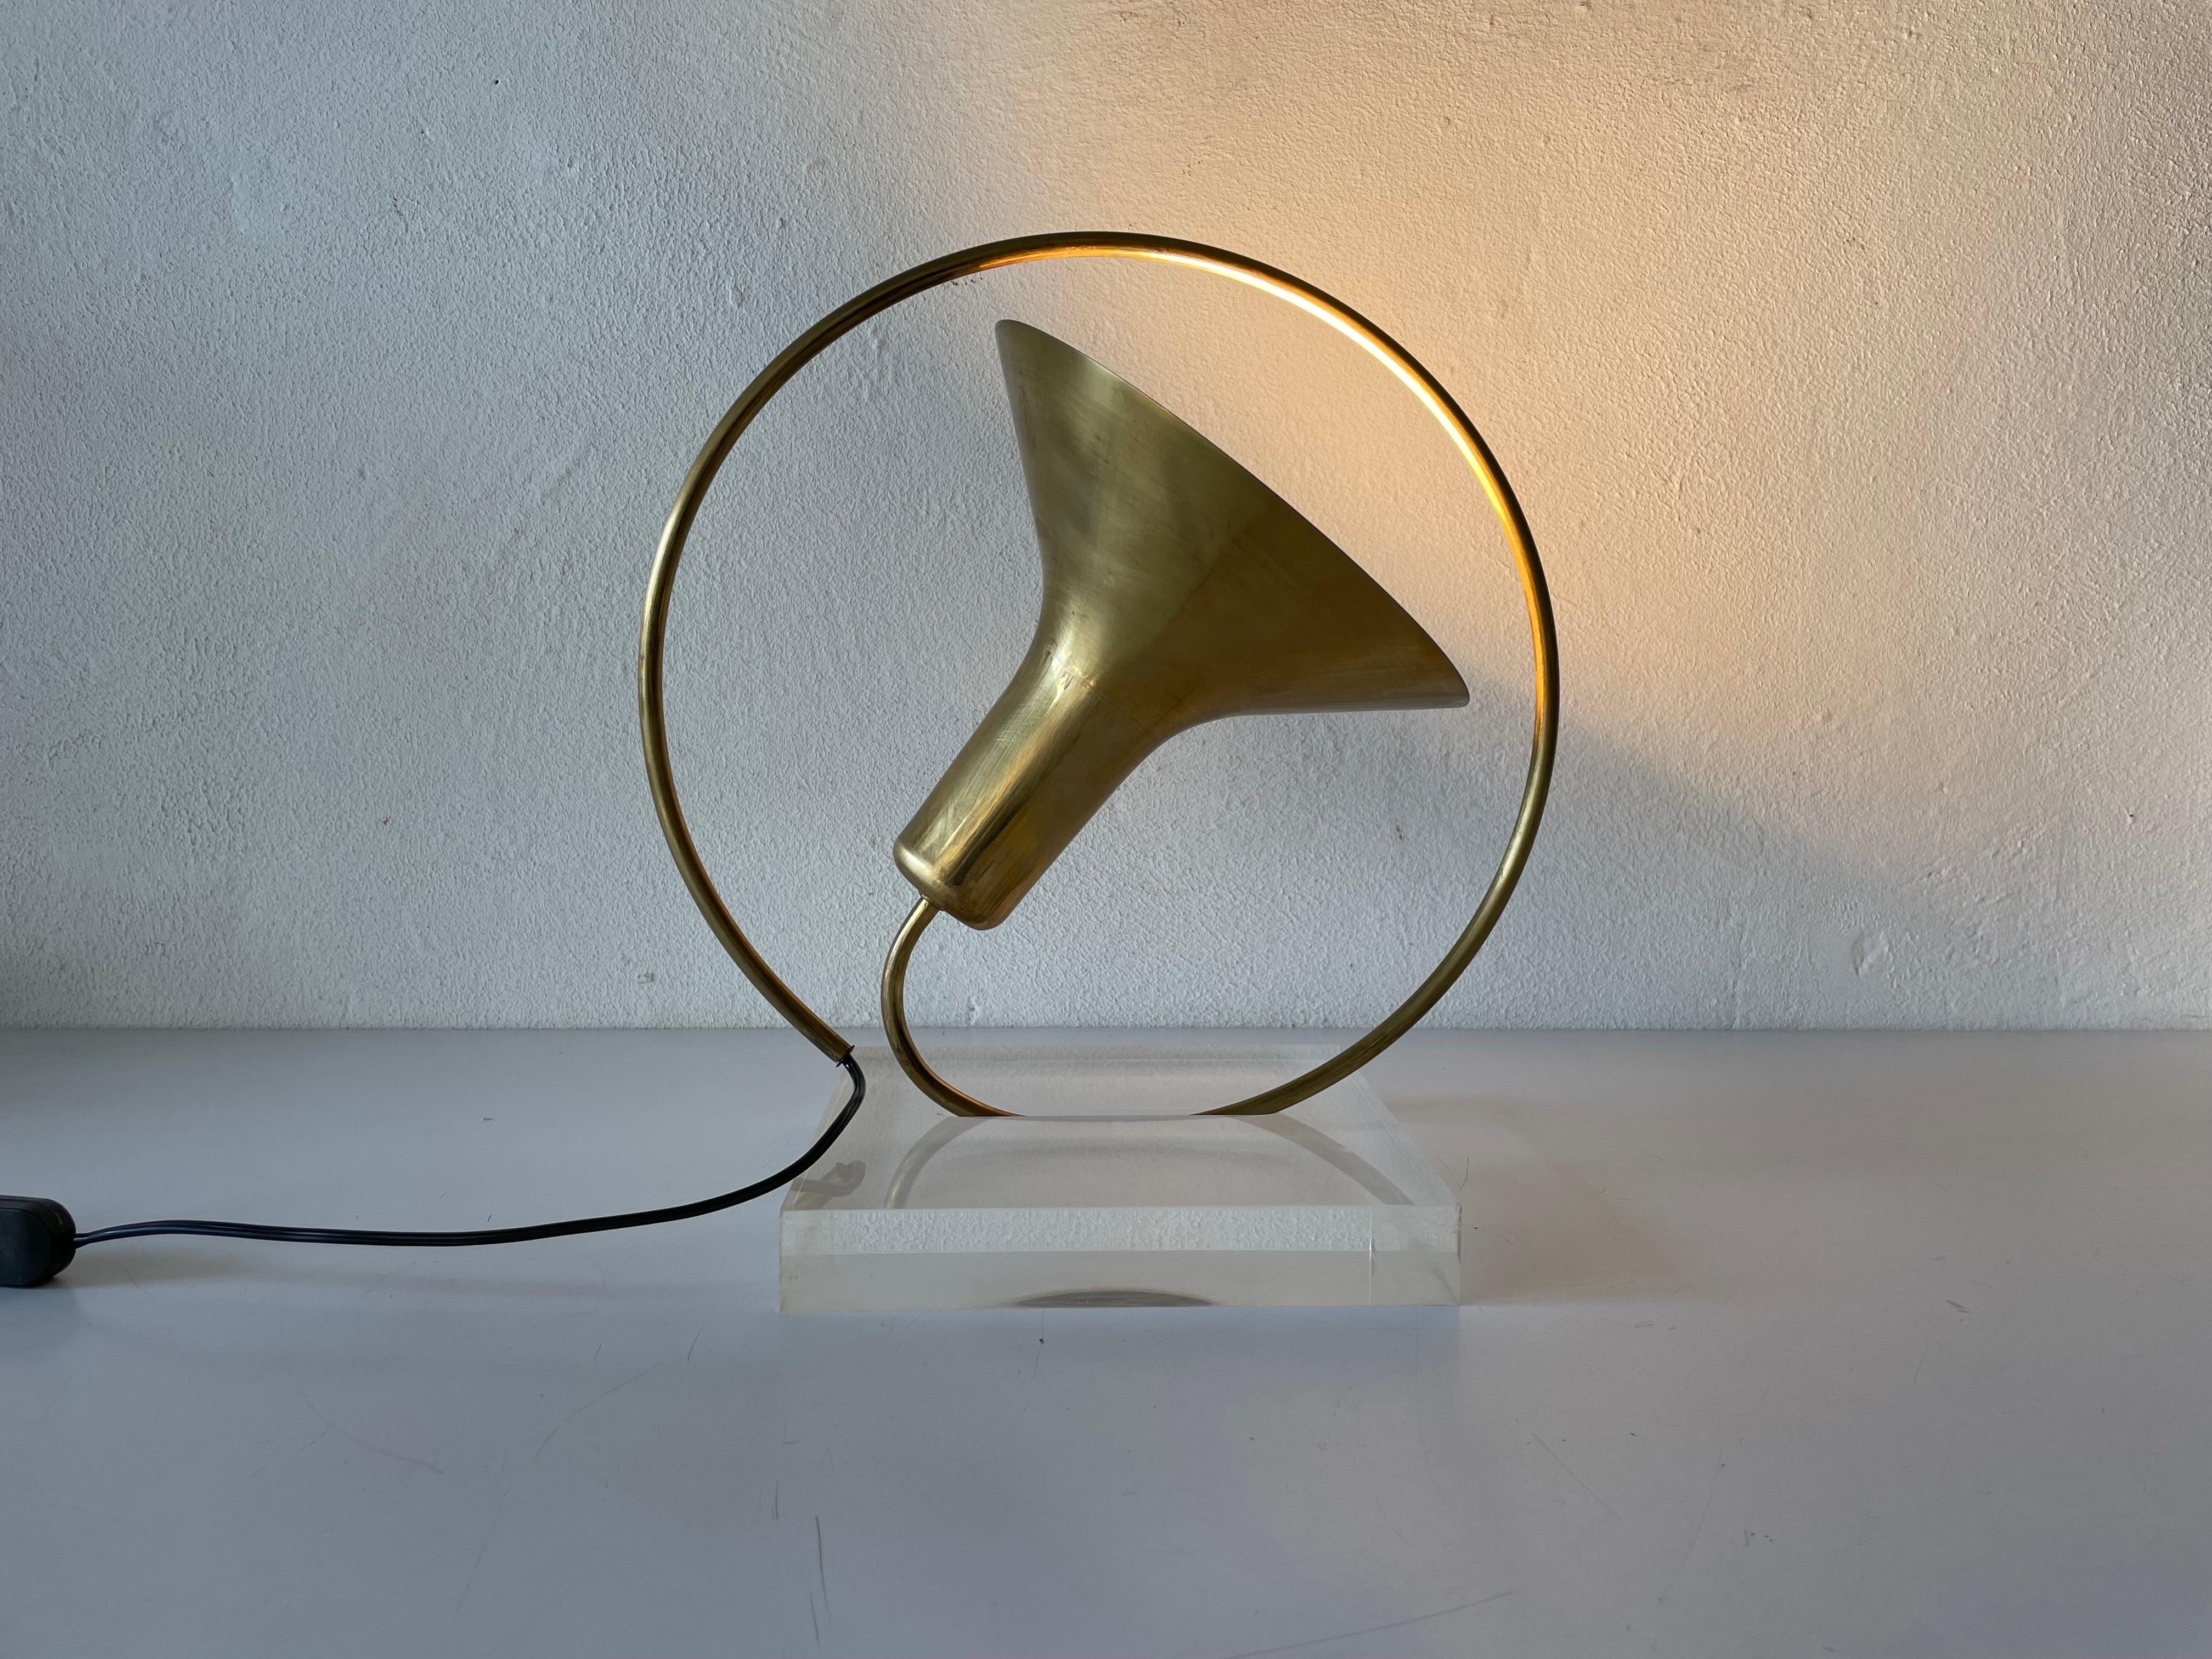 Brass & Lucite Trumpet Design Table Lamp, 1960s, Italy For Sale 4